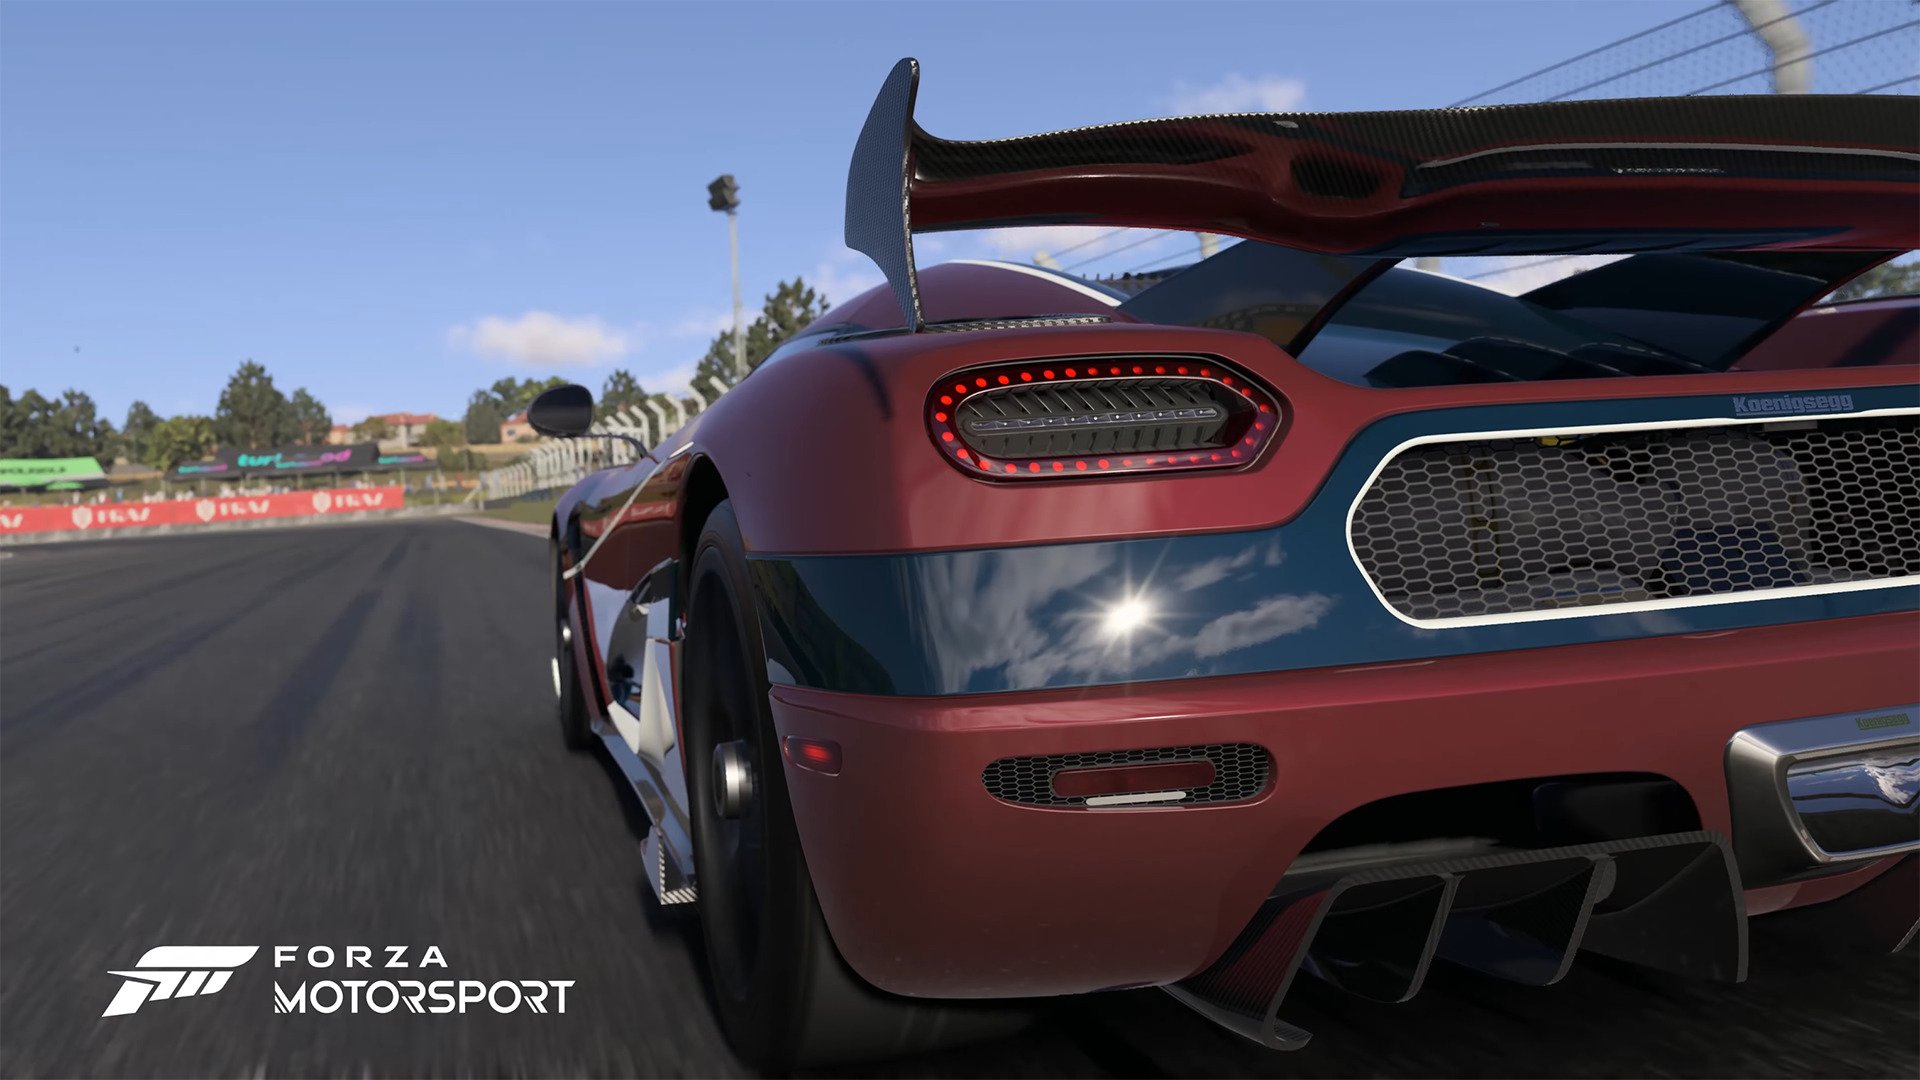 New details of Forza Motorsport 4 released